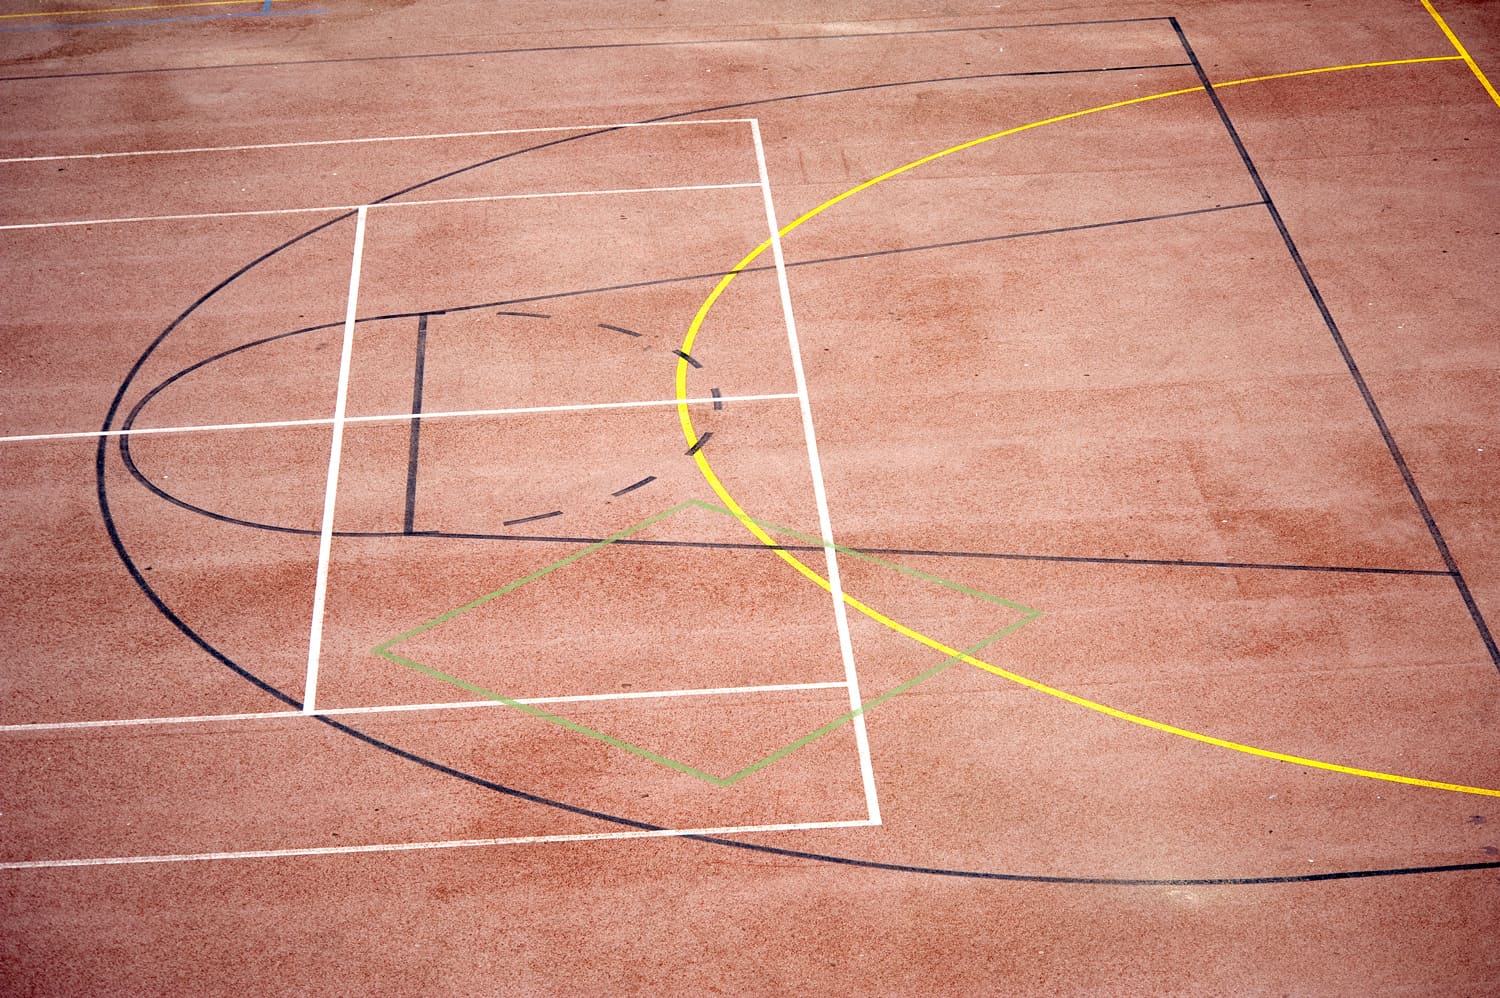 Lines on an outdoor basketball court.